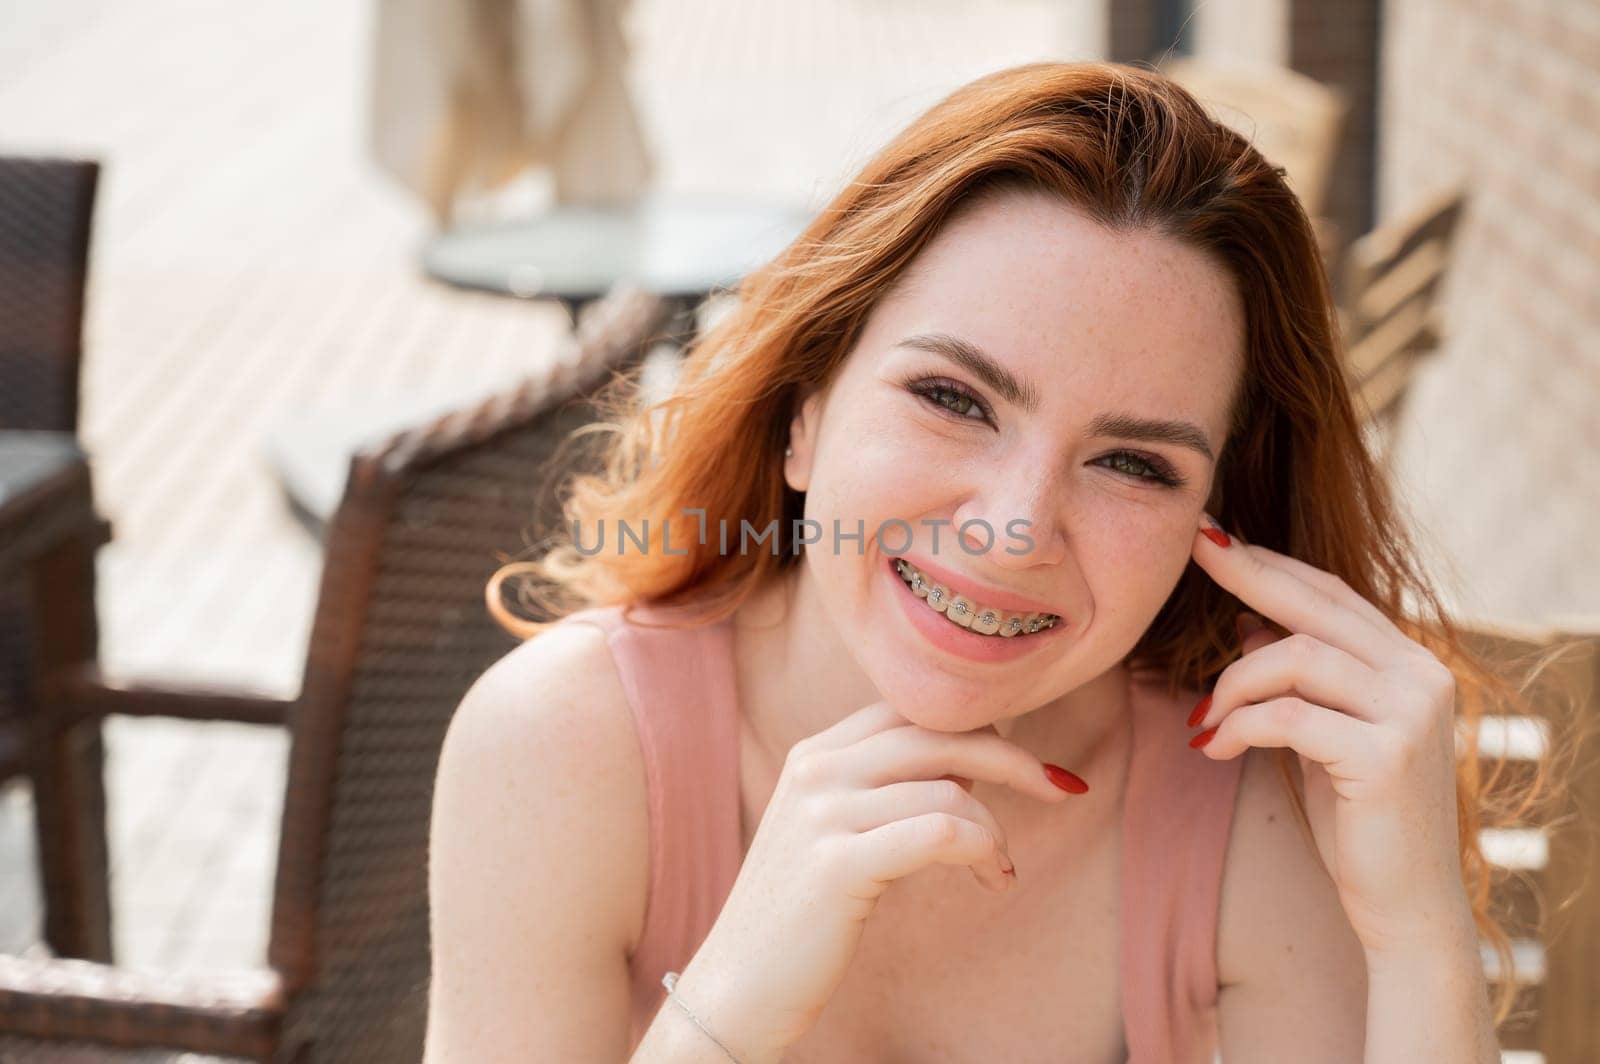 Beautiful young red-haired woman with braces on her teeth smiling while sitting in an outdoor cafe